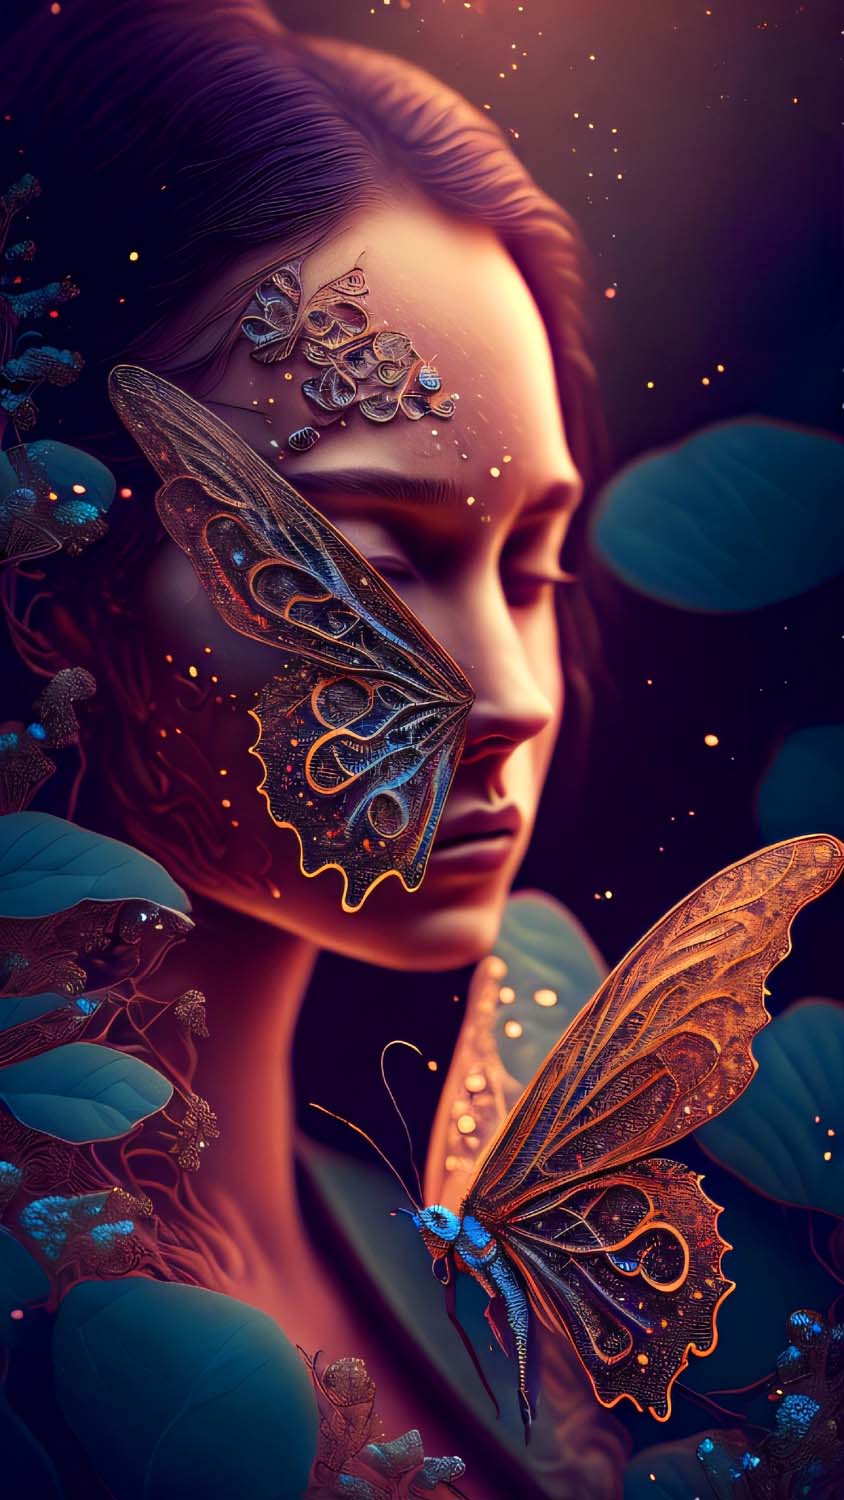 Butterfly Girl IPhone Wallpaper HD - IPhone Wallpapers : iPhone ...